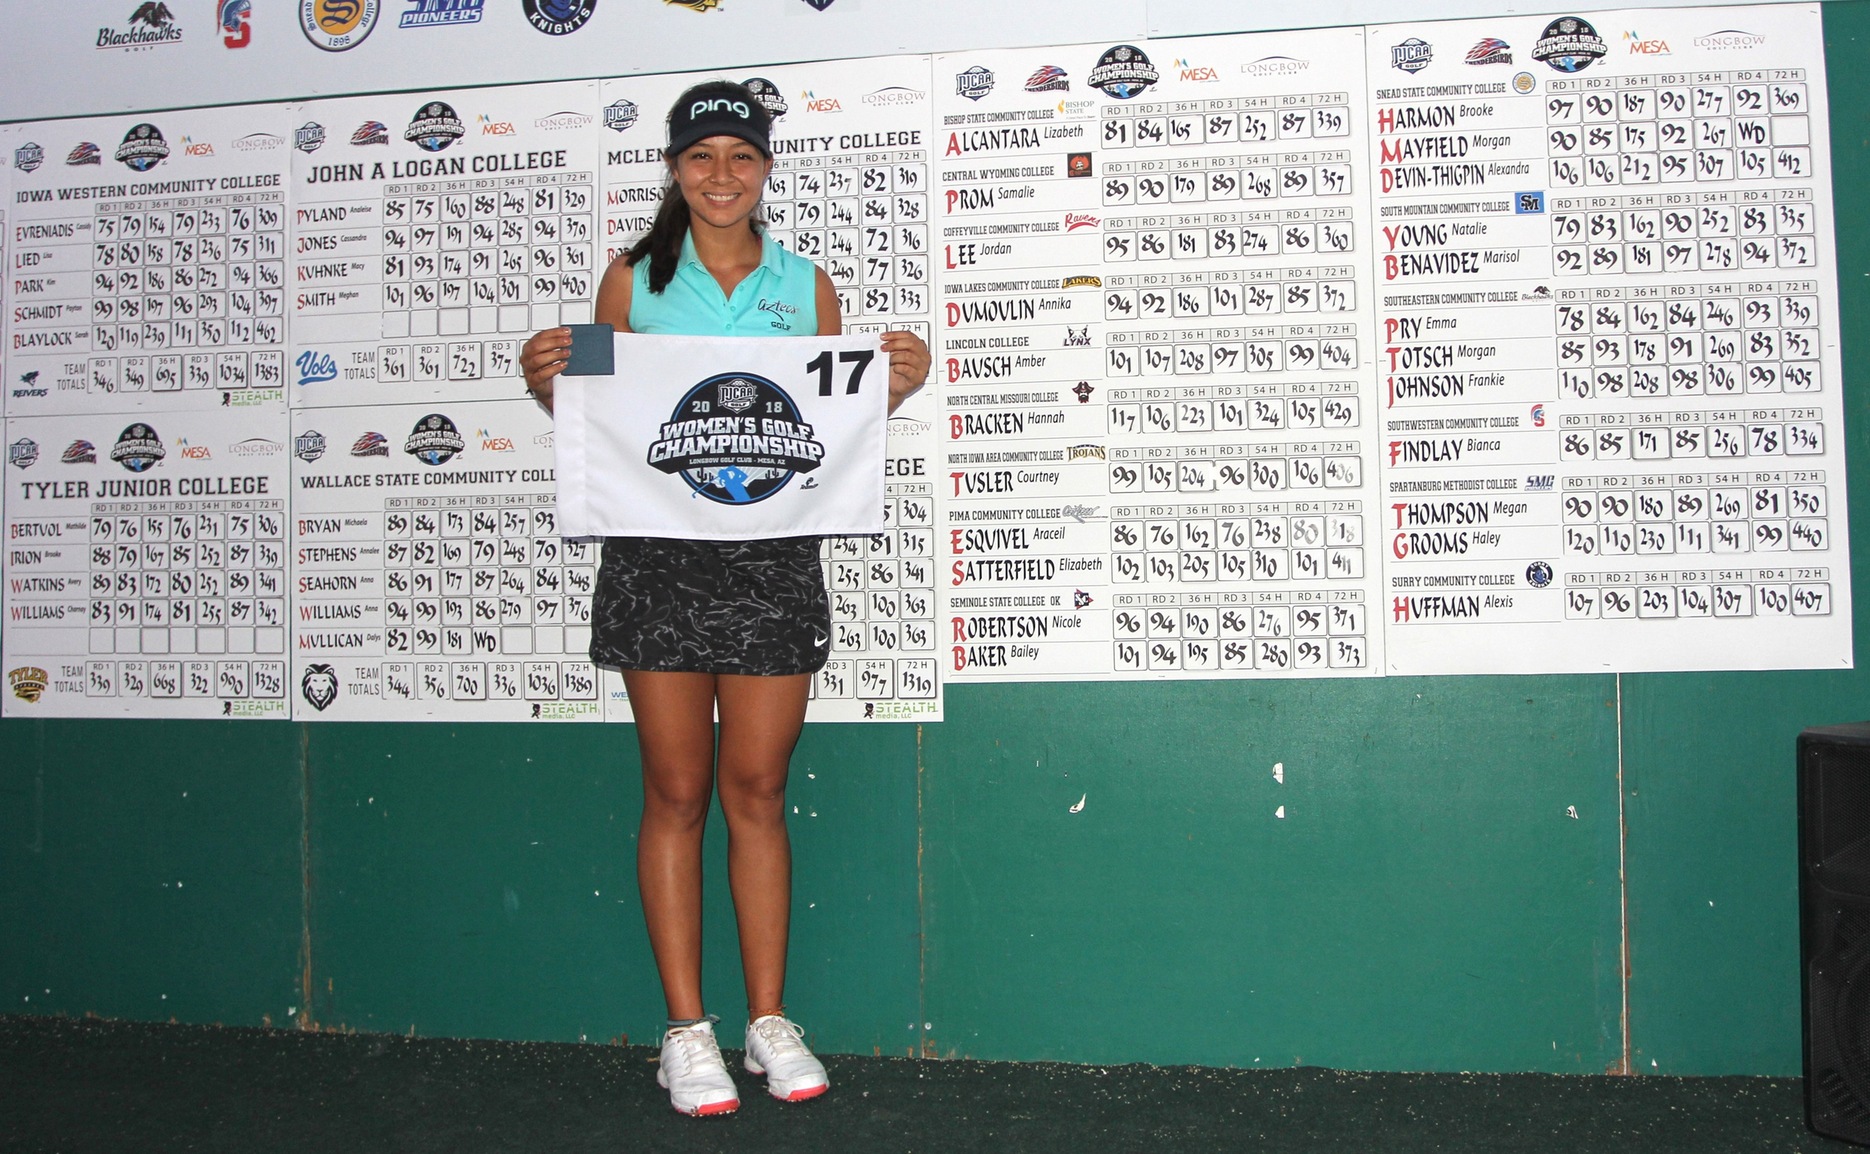 Sophomore Araceli Esquivel (Salpointe Catholic HS) was named NJCAA All-American Honorable Mention after she finished tied for 17th in the final individual standings. She shot a 318 (86-76-76-80) at the Longbow Golf Club. Photo by Rick Price